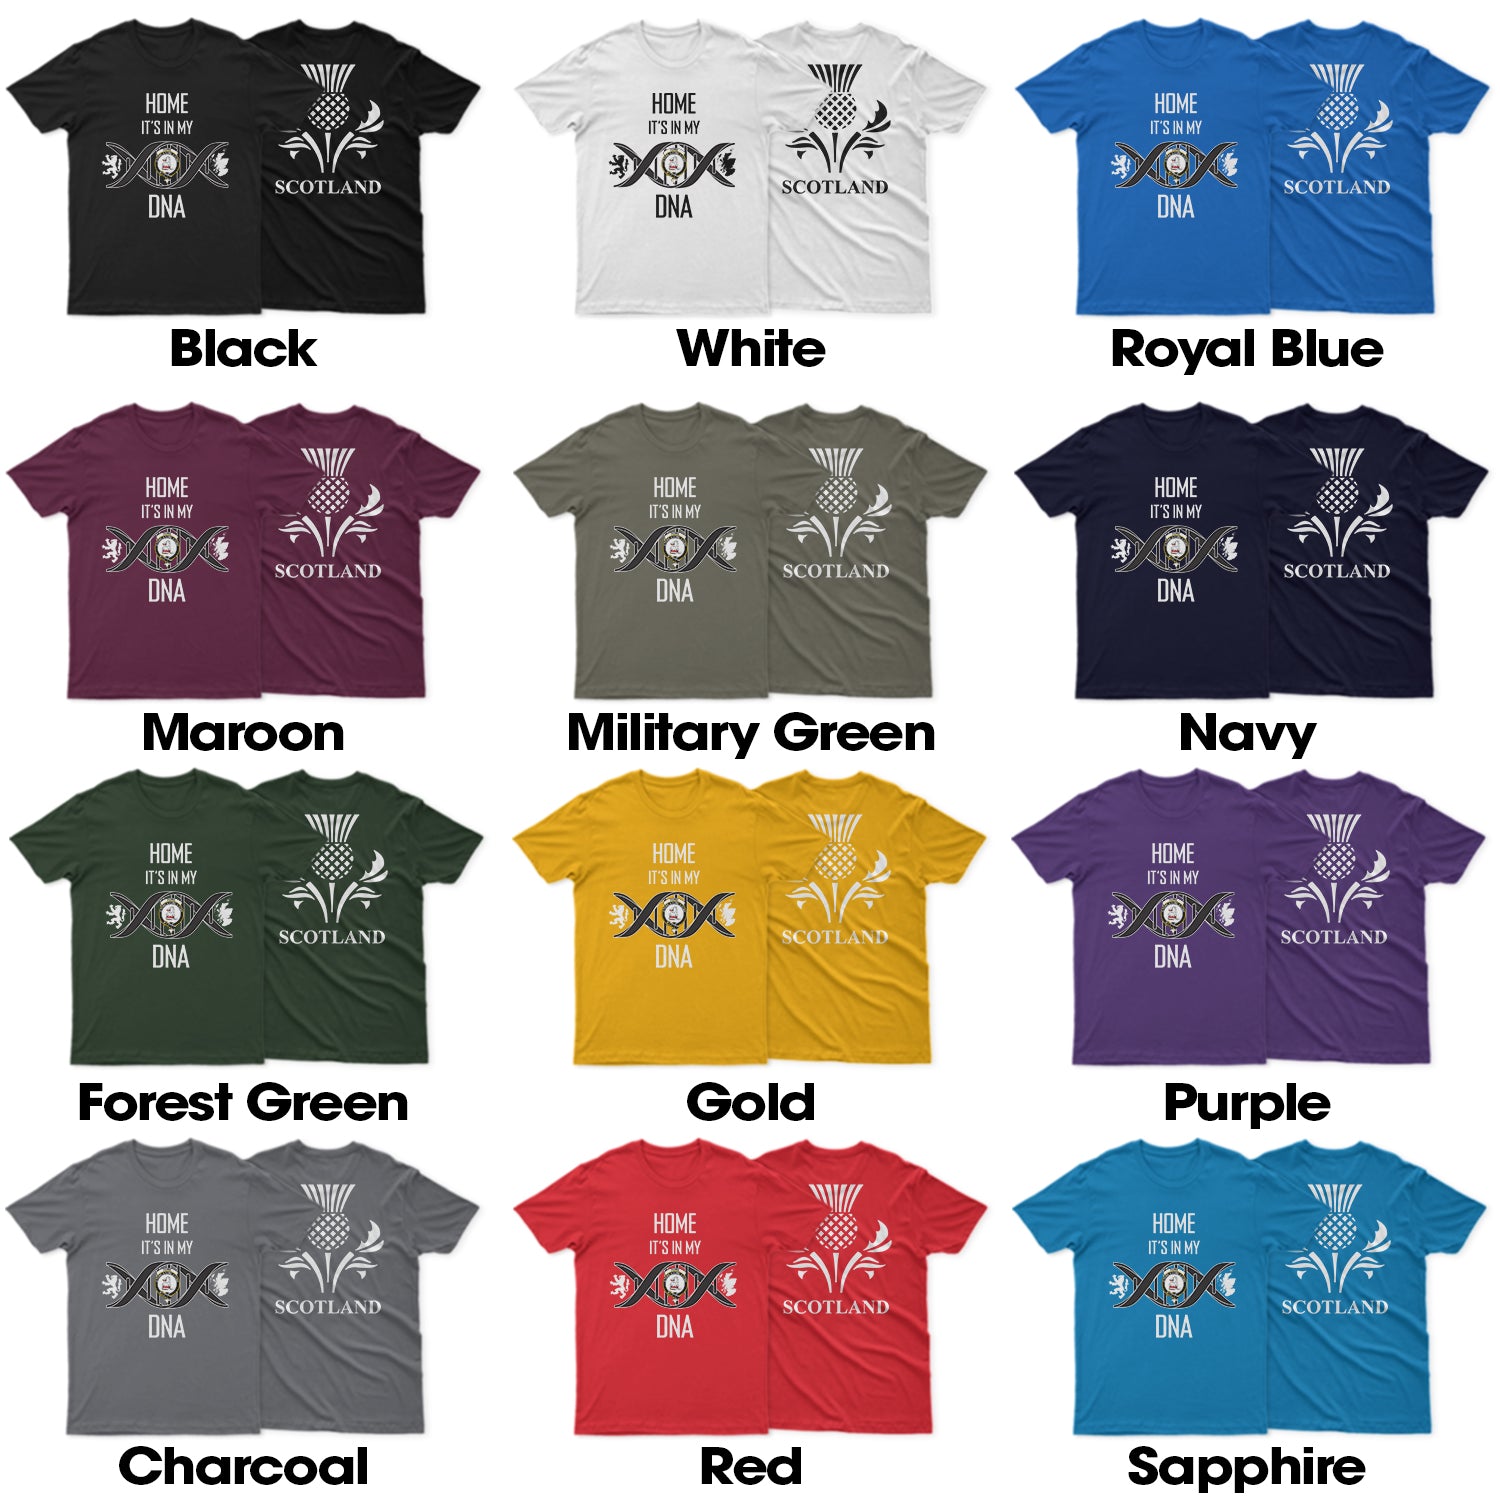 home-family-crest-dna-in-me-mens-t-shirt